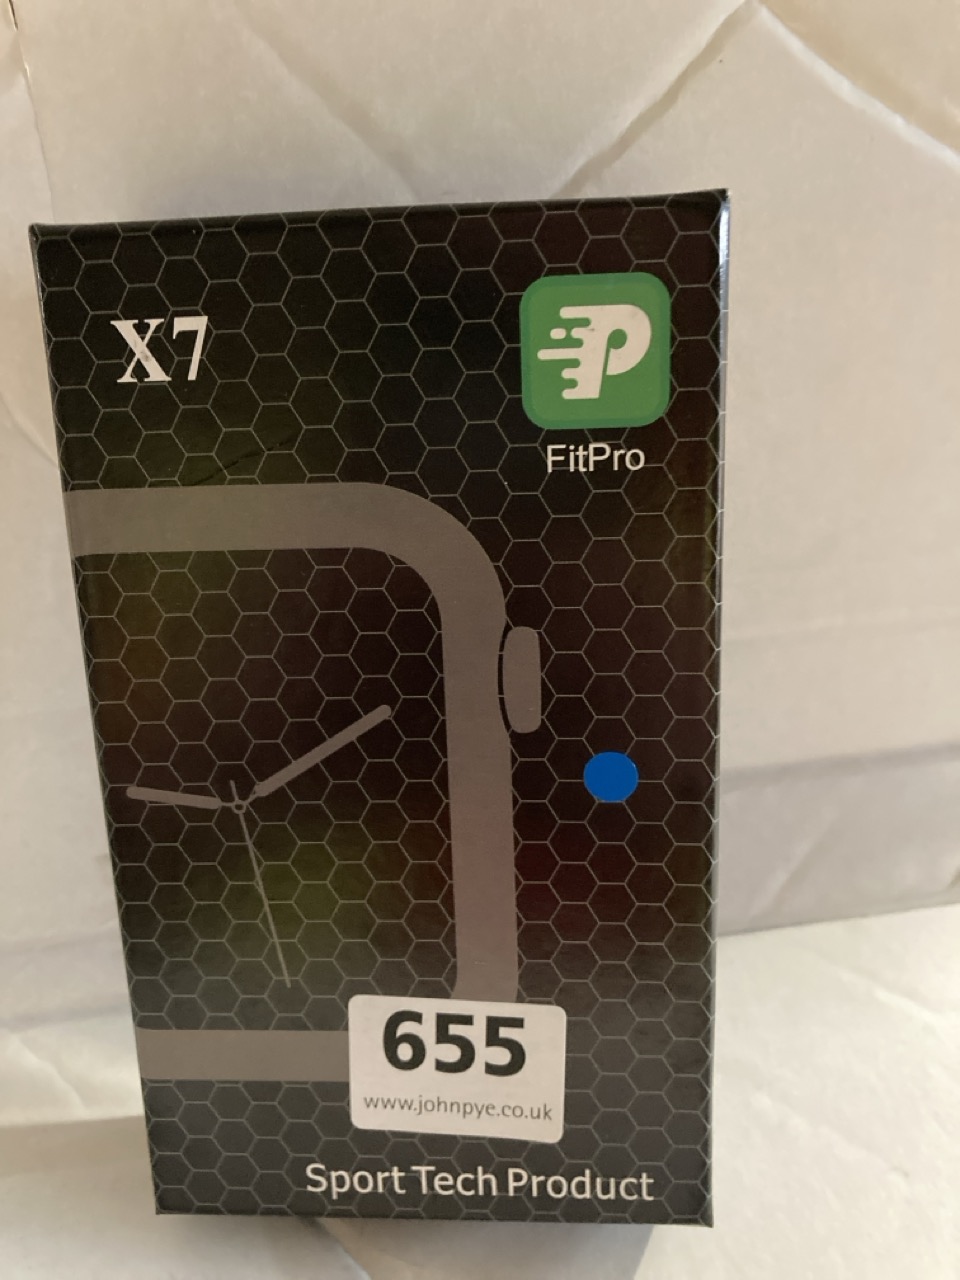 3 X SMARTWATCH "FITPRO X7" WITH BLUETOOTH 4.0, HEART RATE METER, BLOOD PRESSURE METER, SPORT MODE, CAMERA CONTROL AND ALARM. COMPATIBLE WITH ANDROID AND IOS. IN BOX.